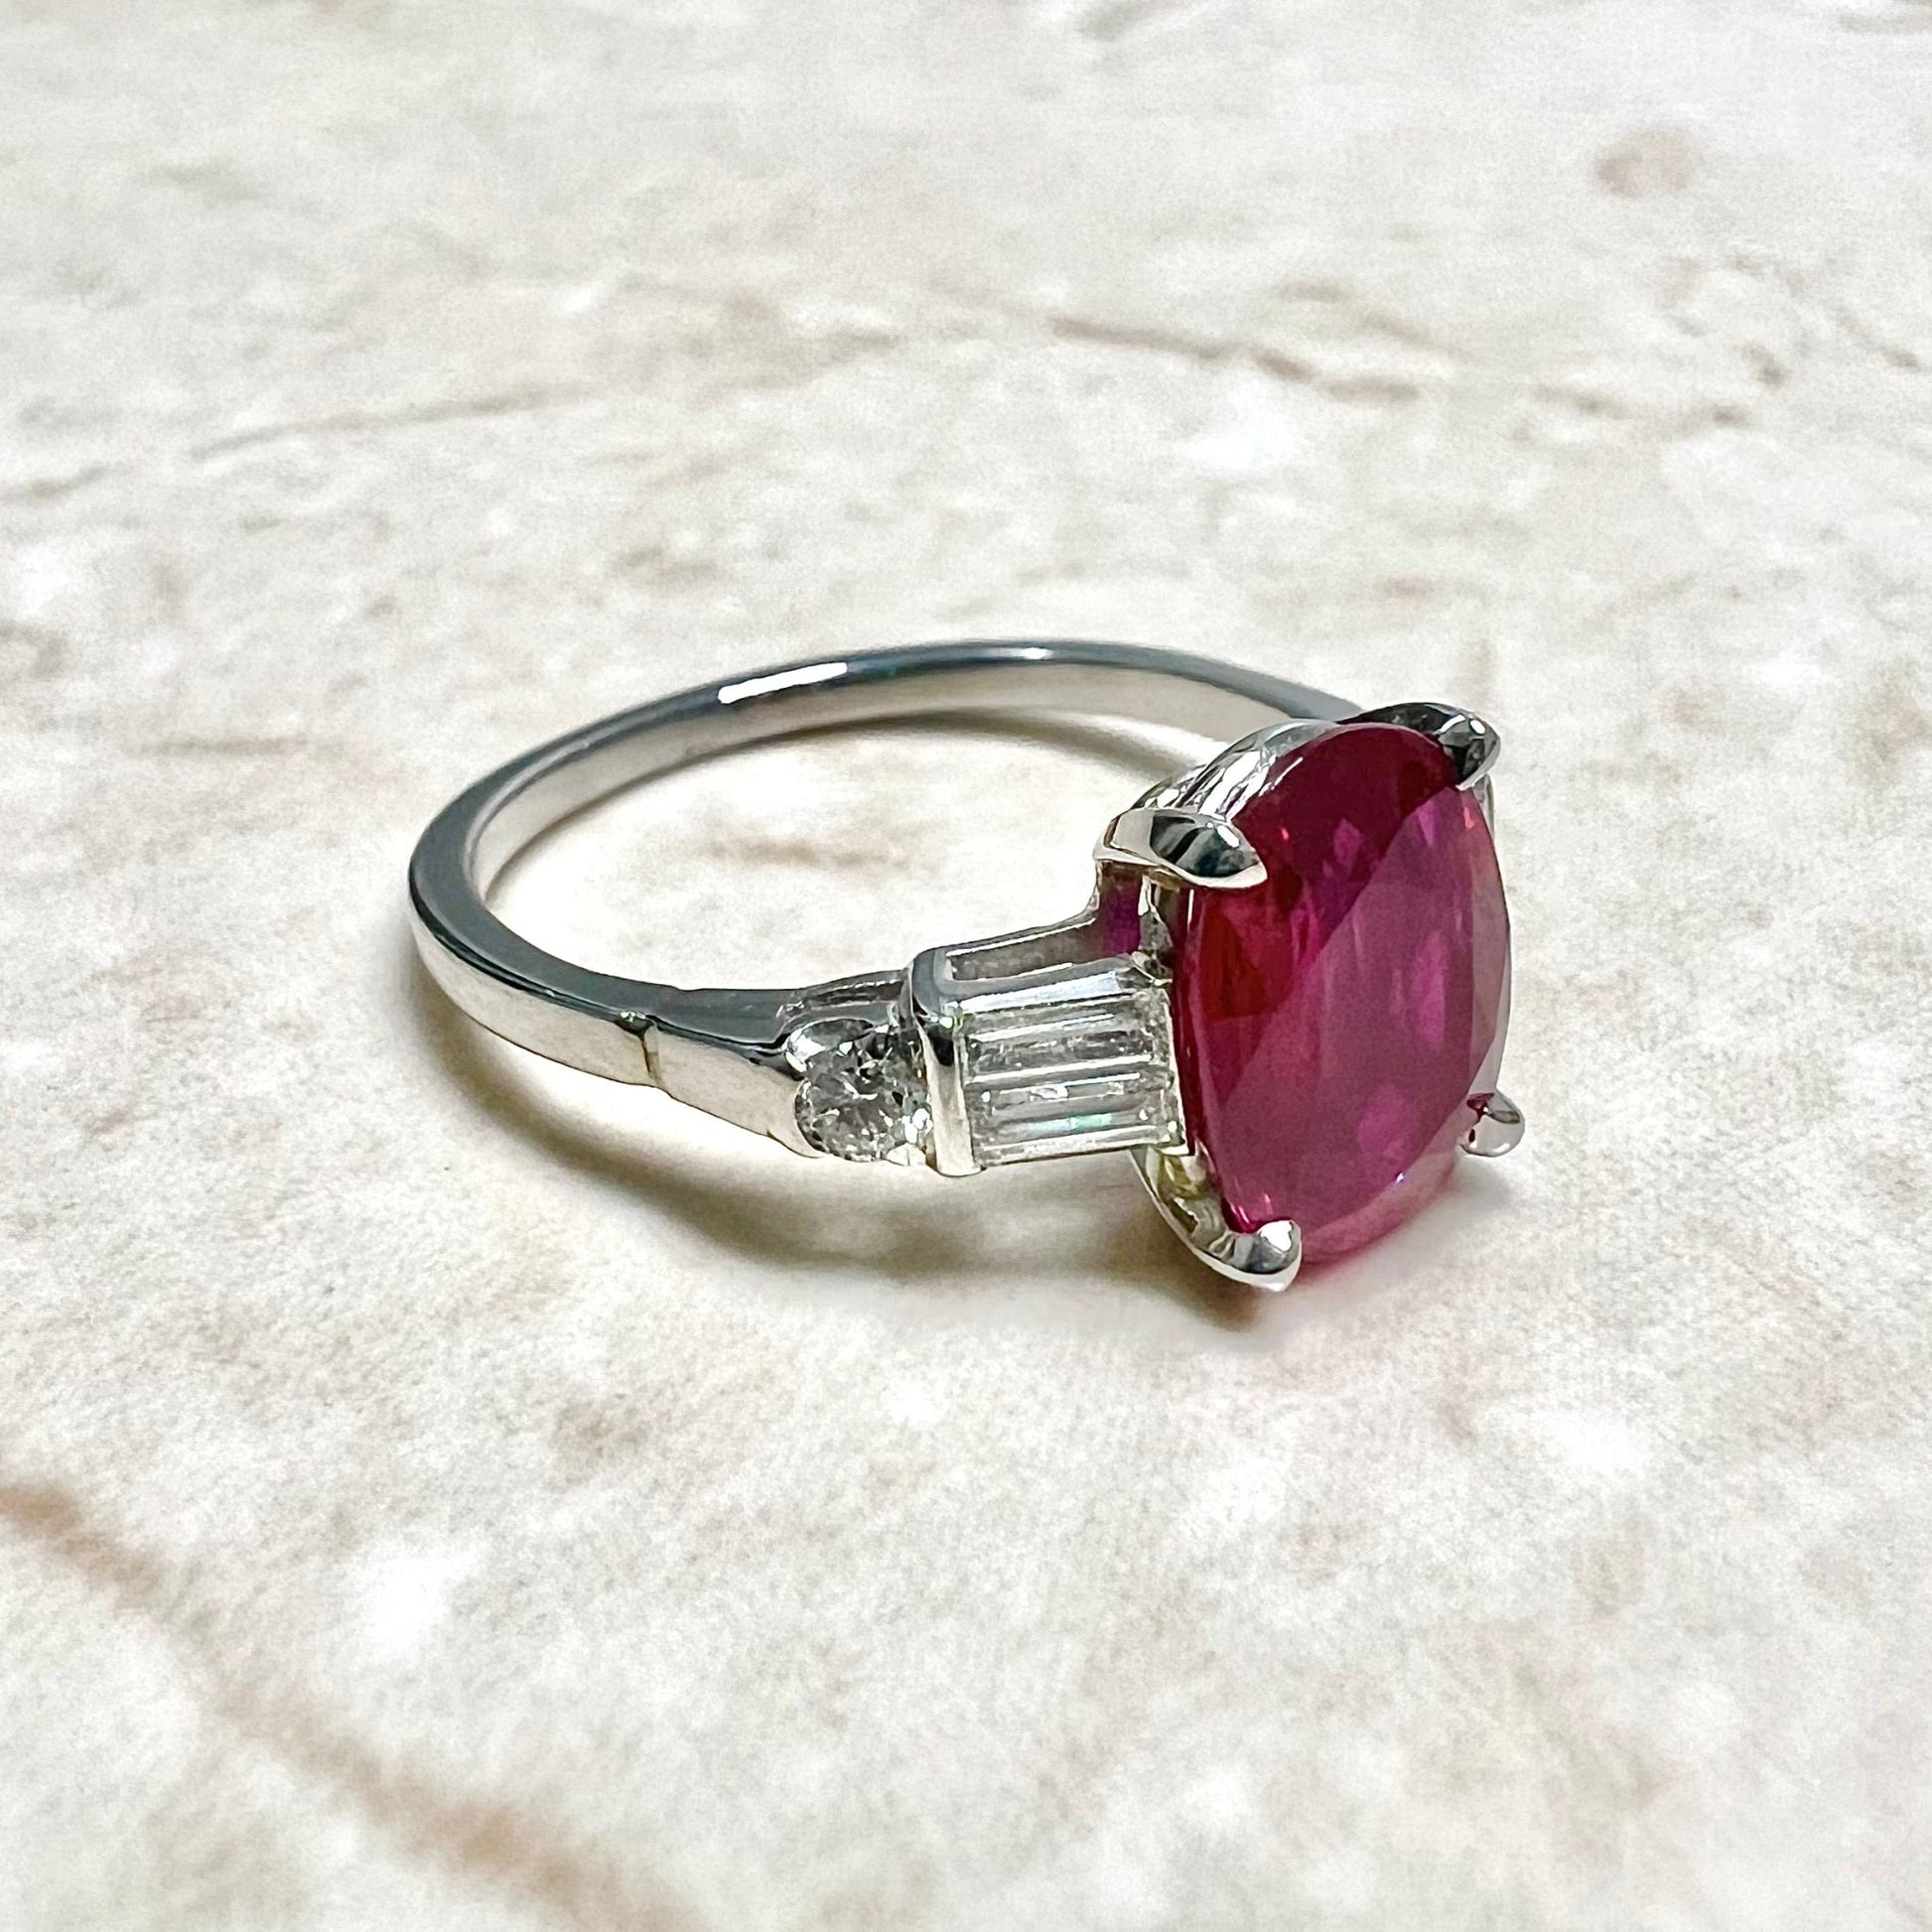 Vintage Handcrafted Platinum 2.05 Carat Oval Ruby & Diamond Engagement Ring By Carvin French - WeilJewelry